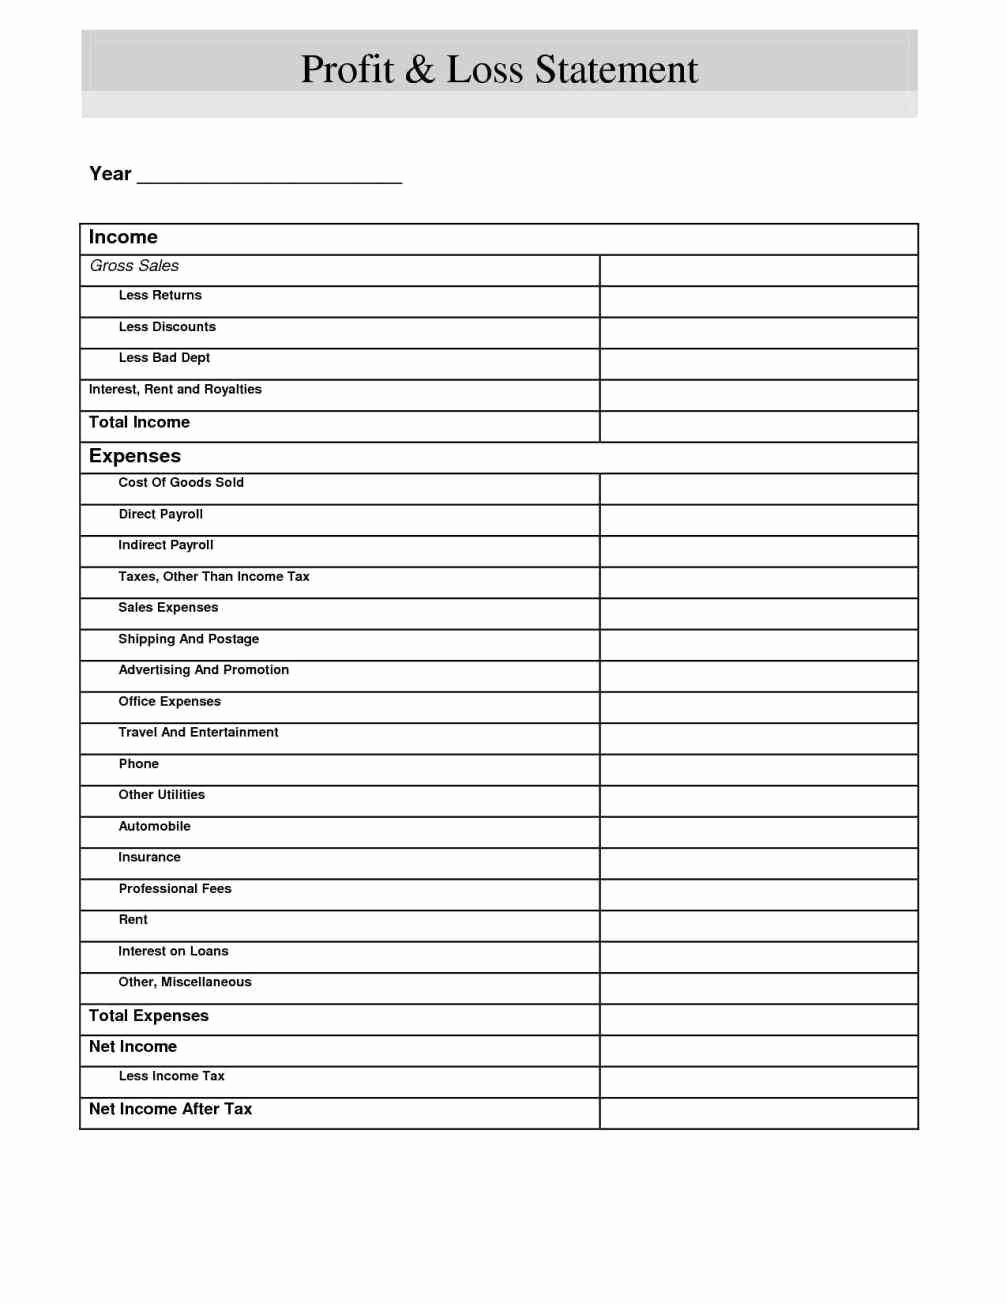 Loss and Profit forms Elegant Blank Profit and Loss Statement Pdf